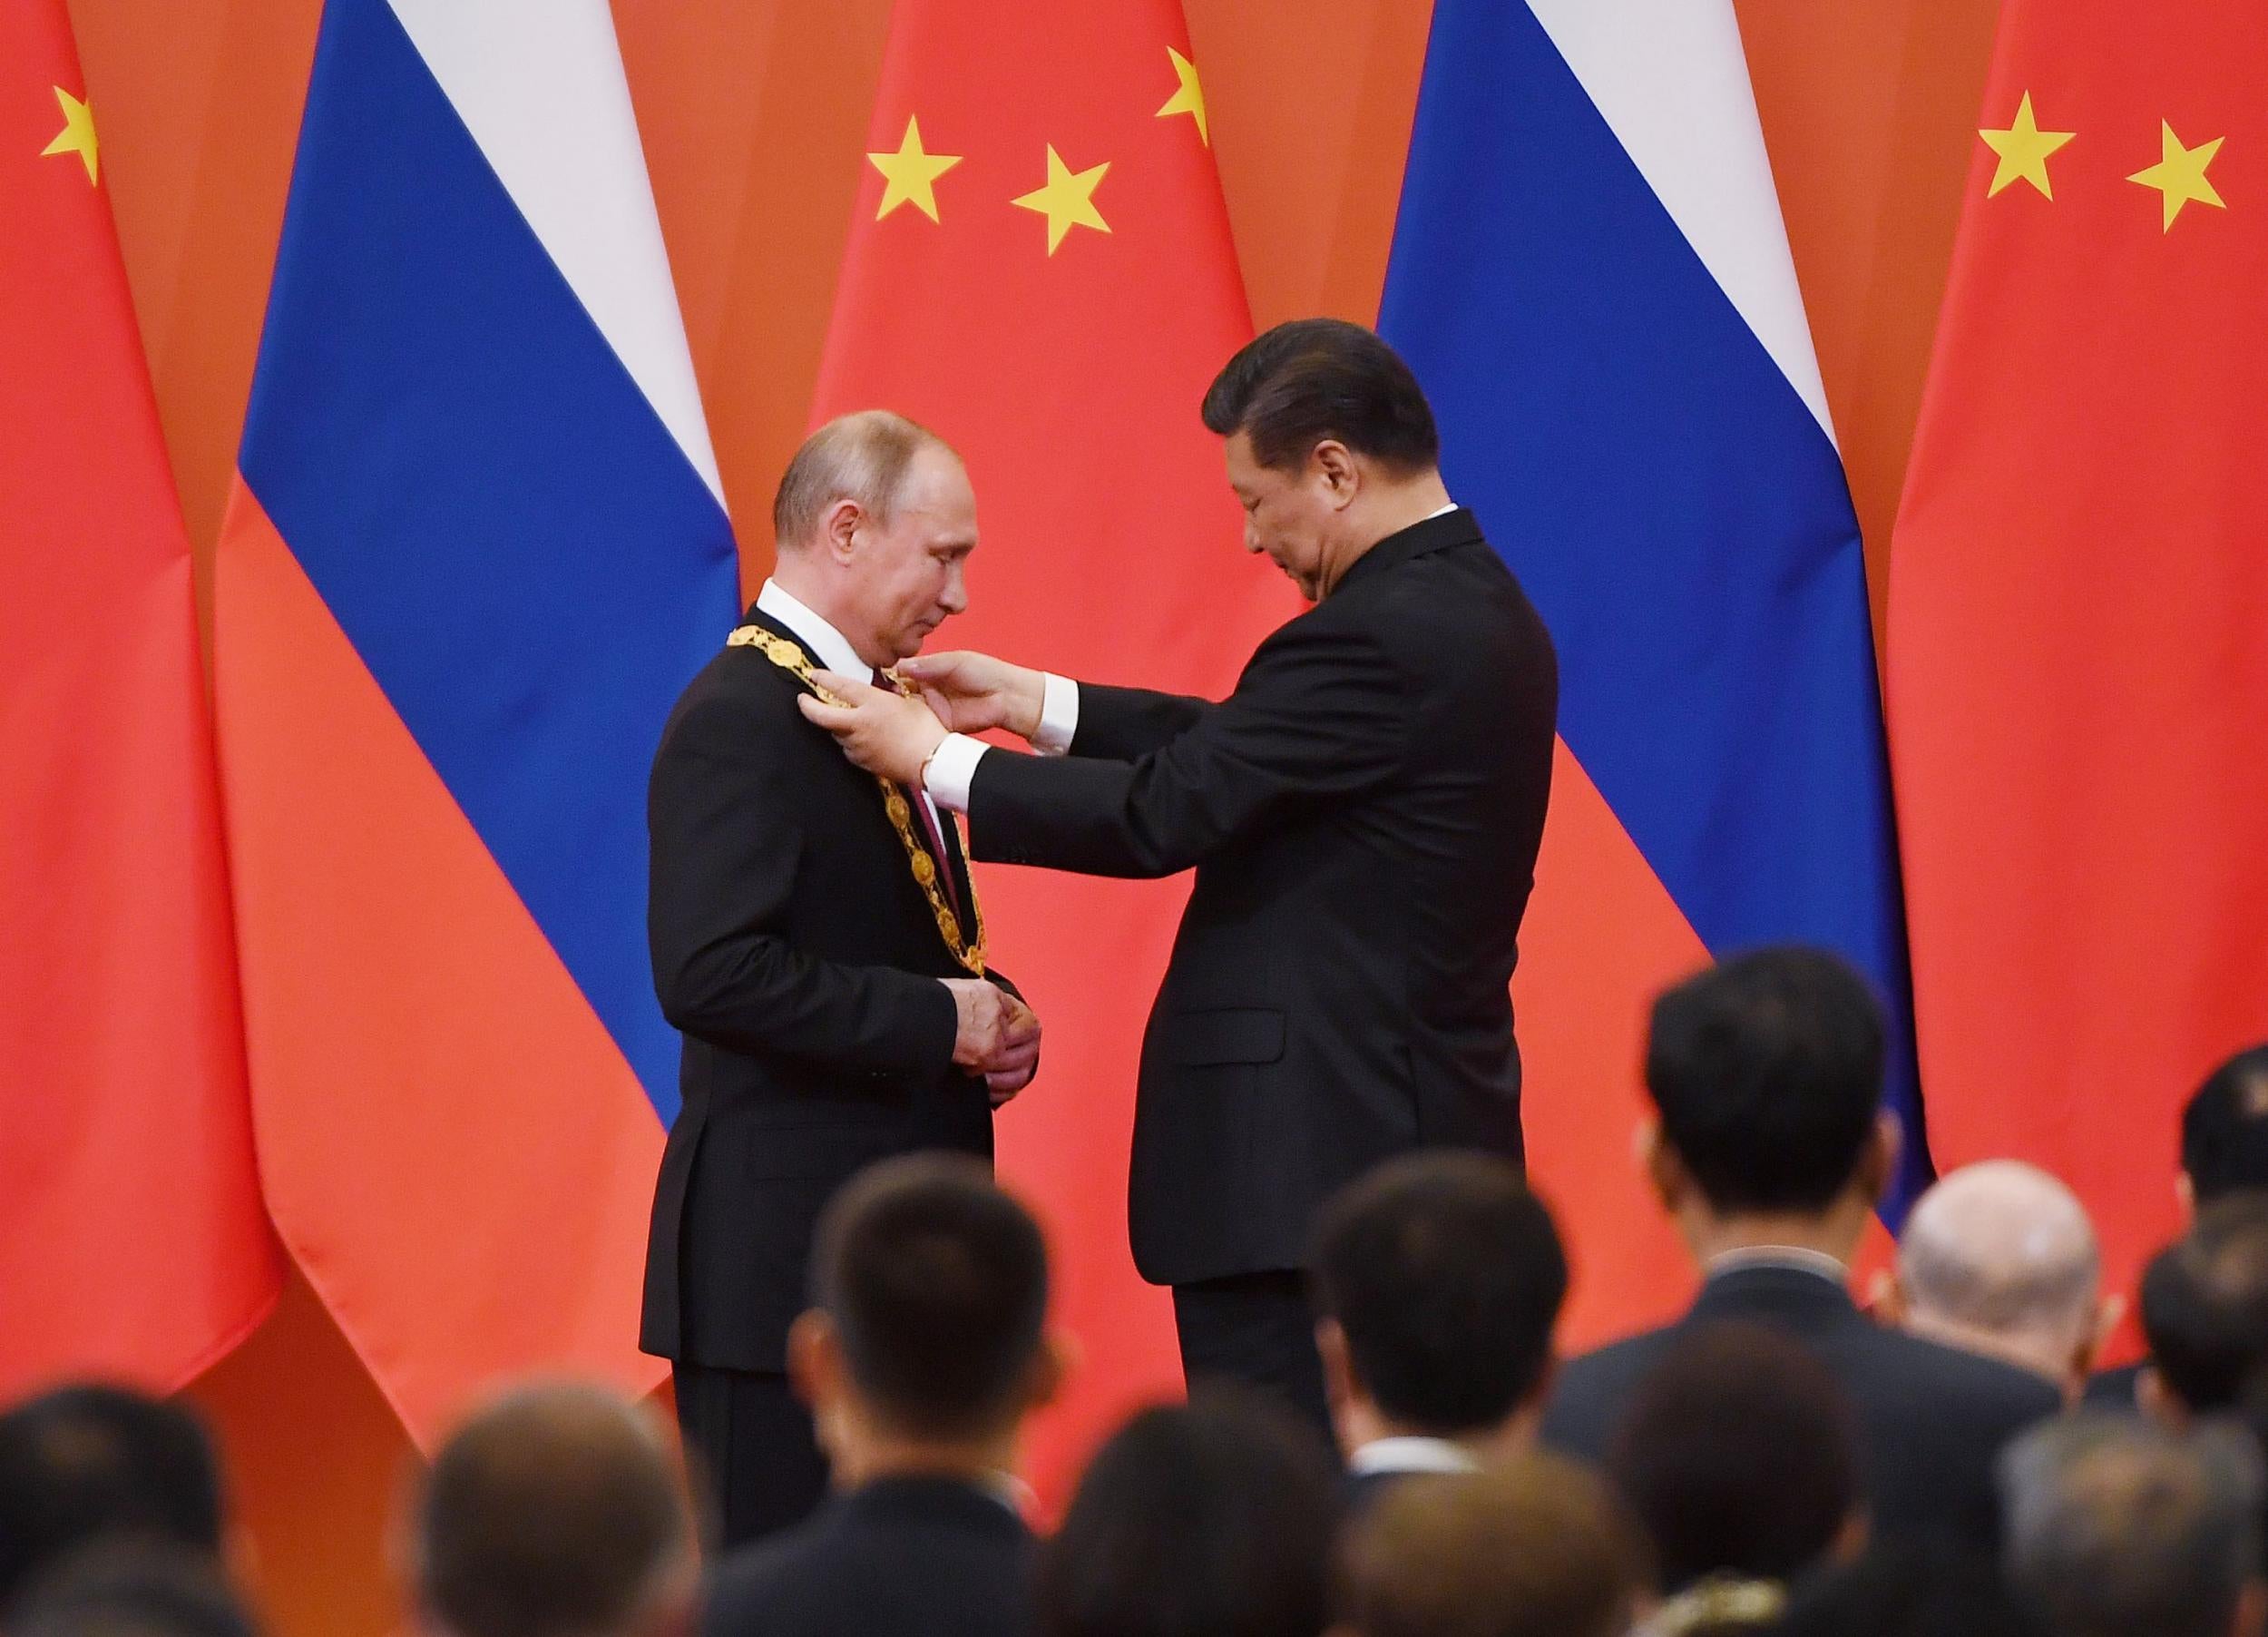 Chinese President Xi Jinping presents Russian President Vladimir Putin with the Medal of Friendship in the Great Hall of the People in Beijing